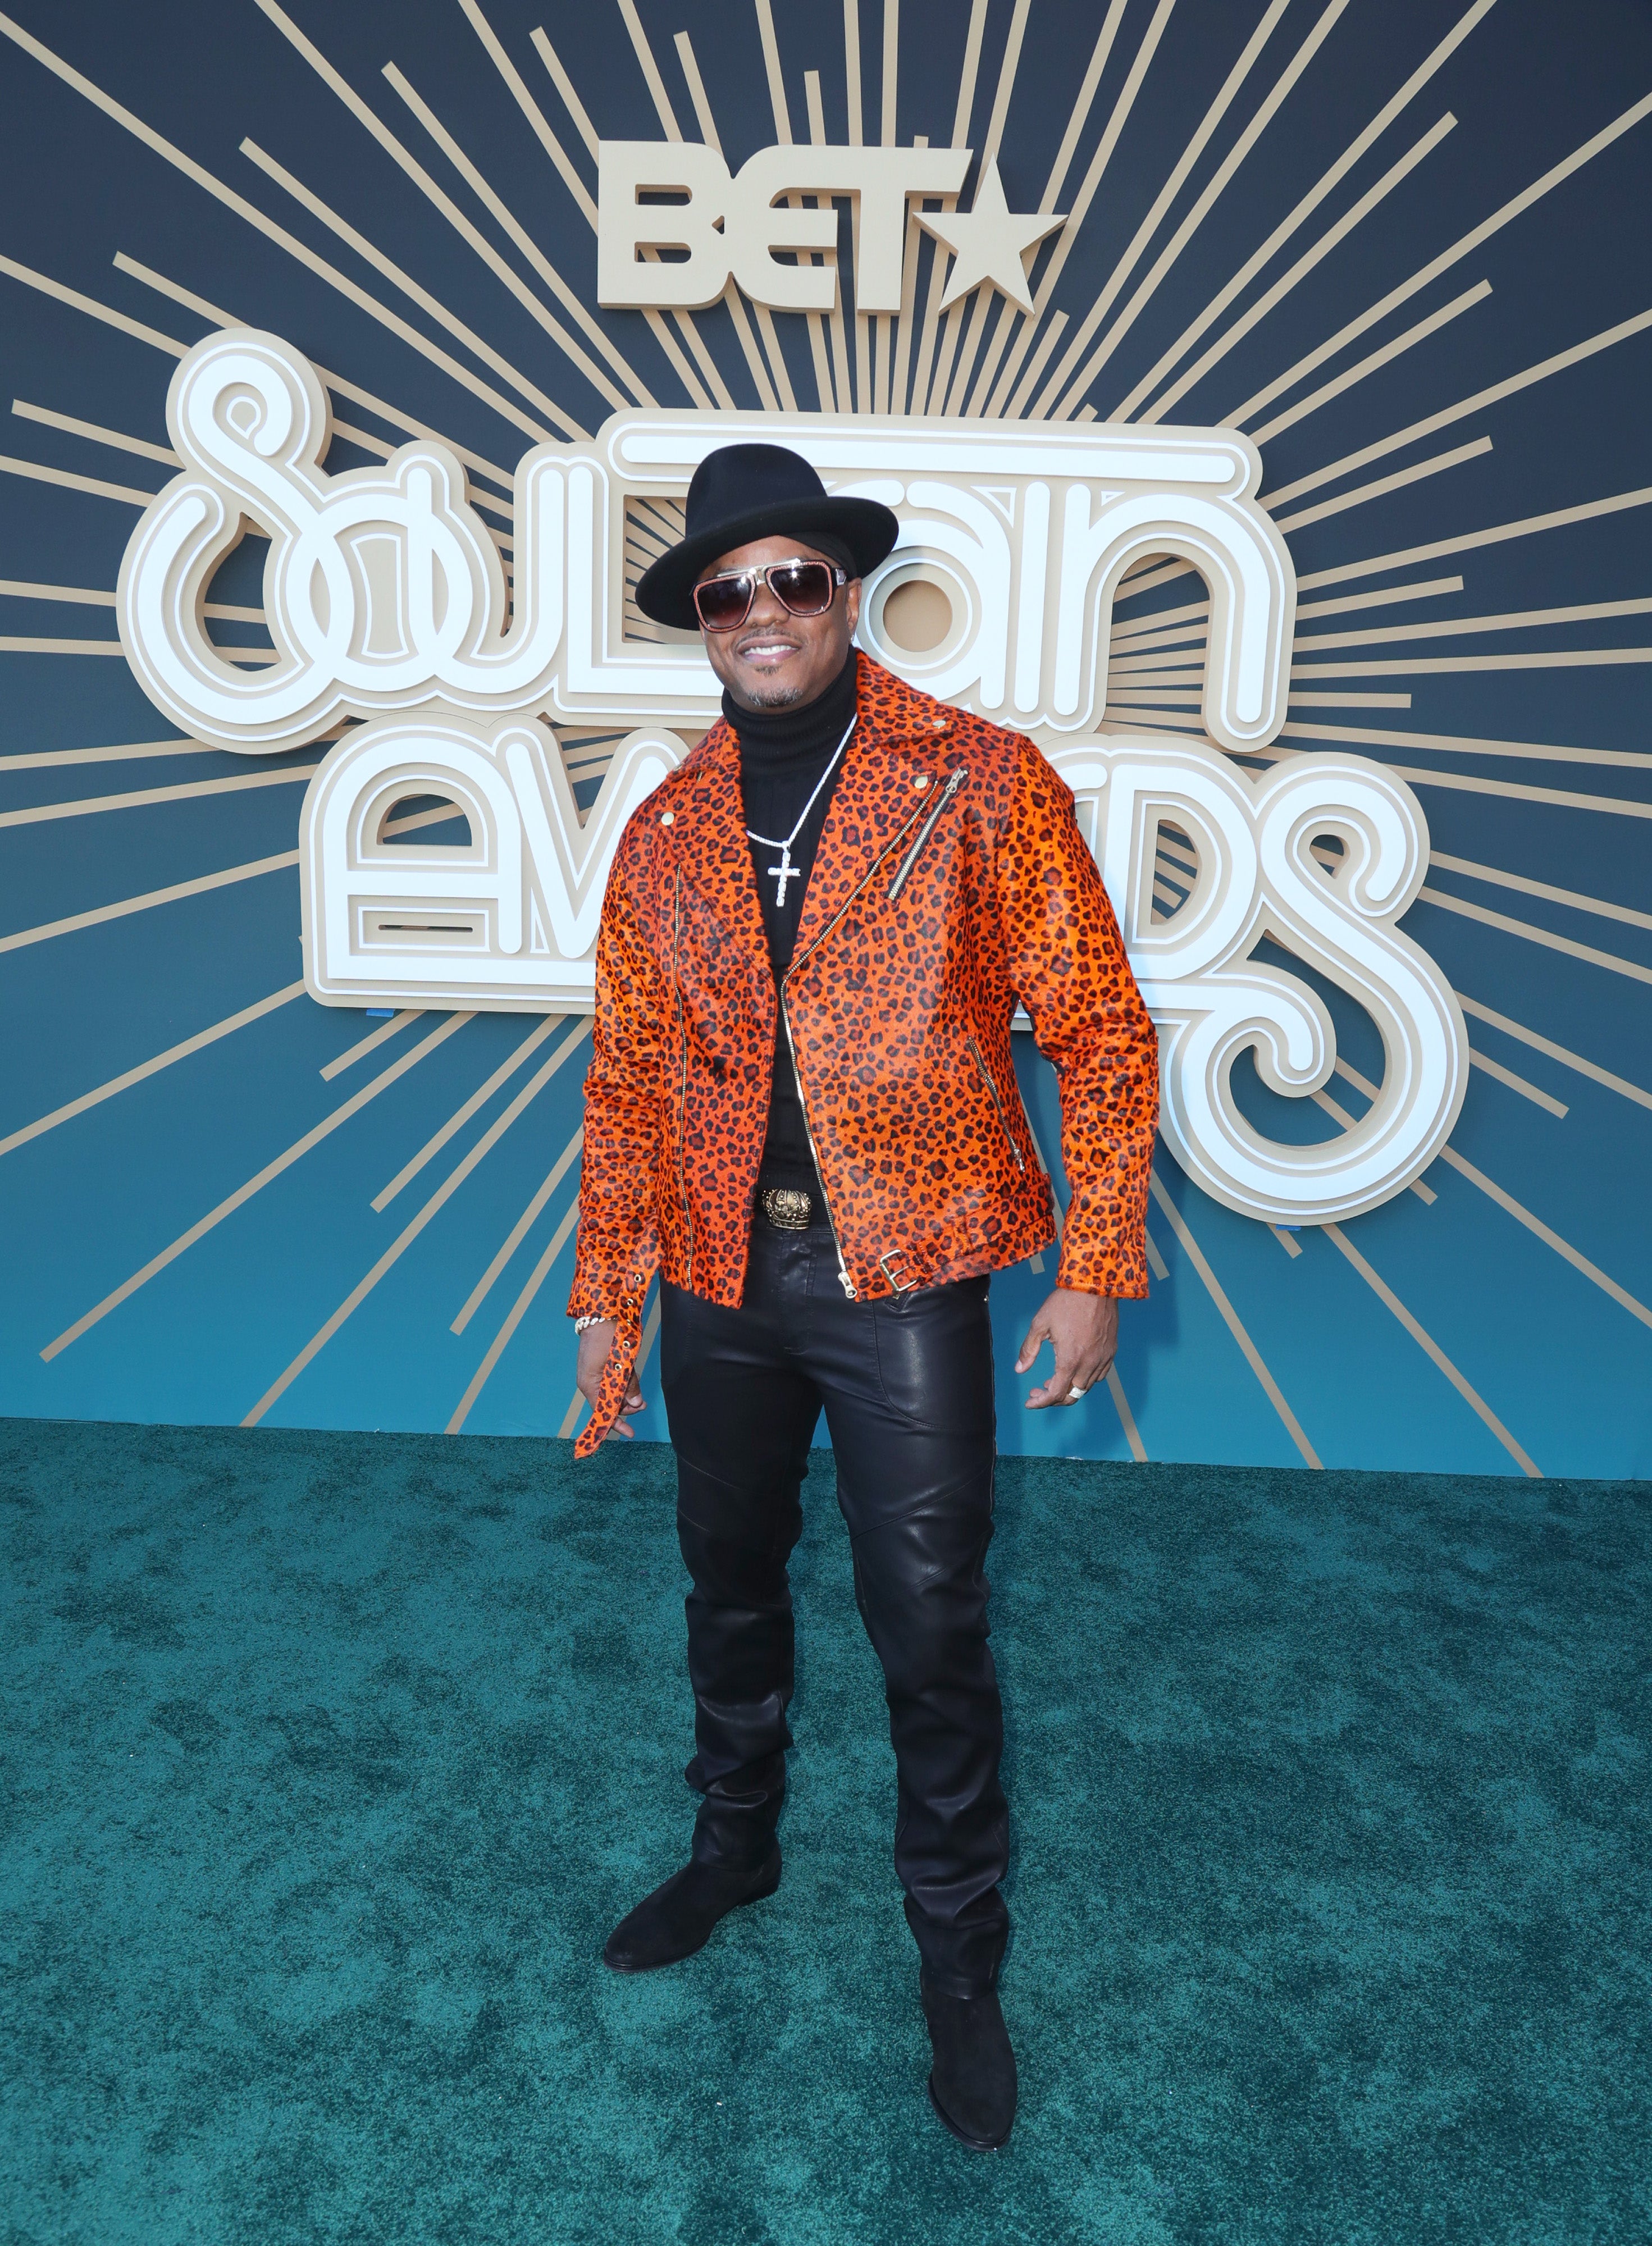 The Best Fashion Moments At The 2019 Soul Train Awards